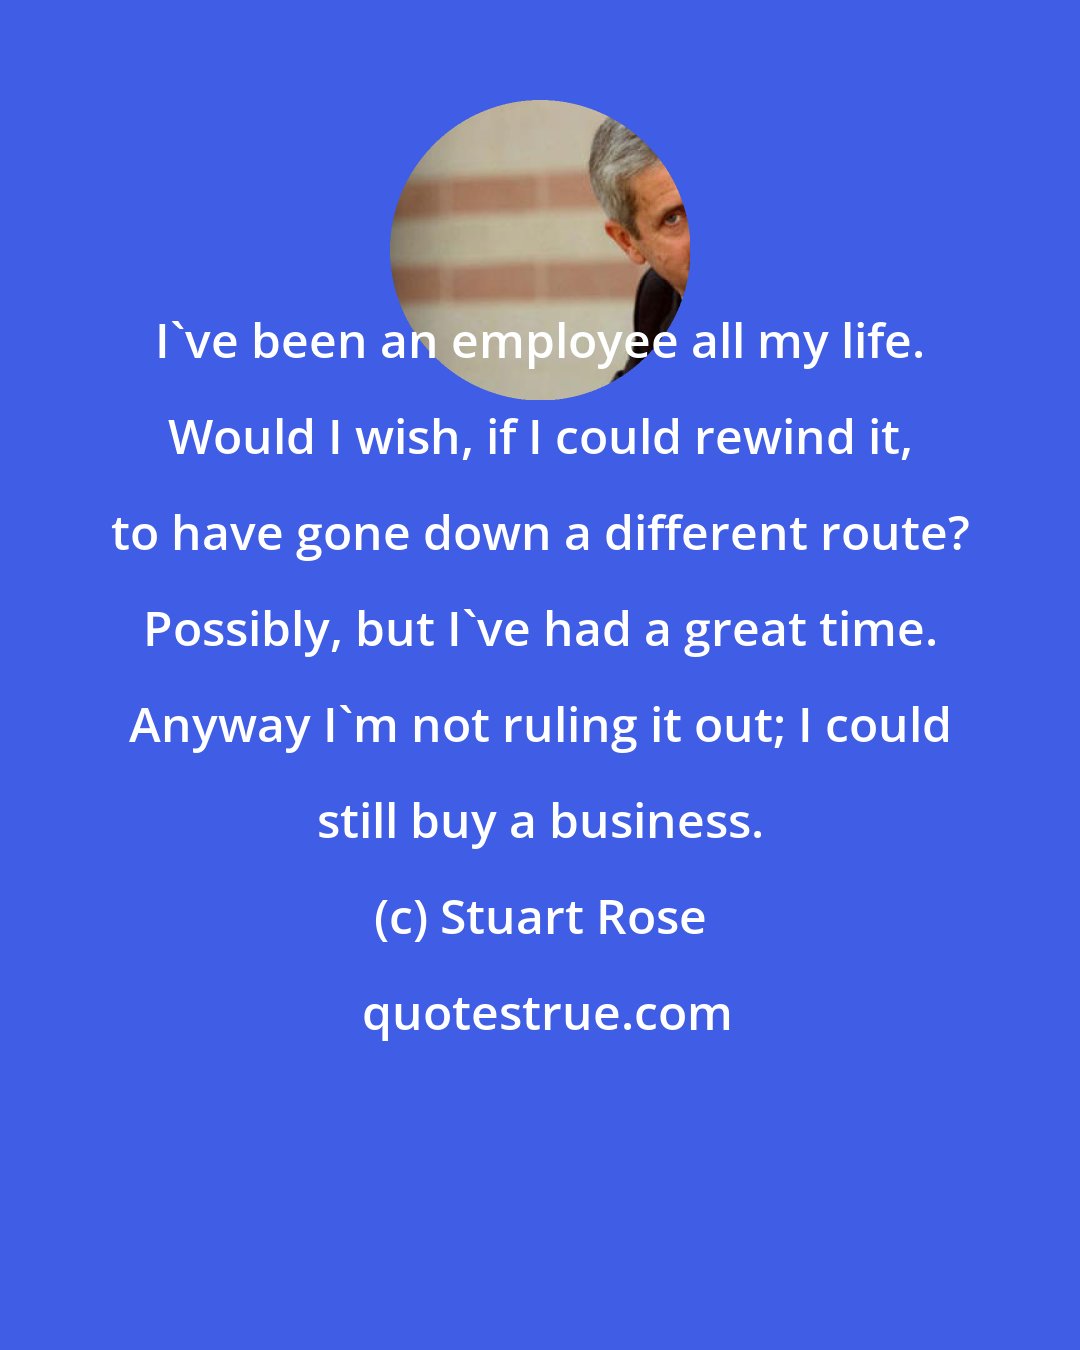 Stuart Rose: I've been an employee all my life. Would I wish, if I could rewind it, to have gone down a different route? Possibly, but I've had a great time. Anyway I'm not ruling it out; I could still buy a business.